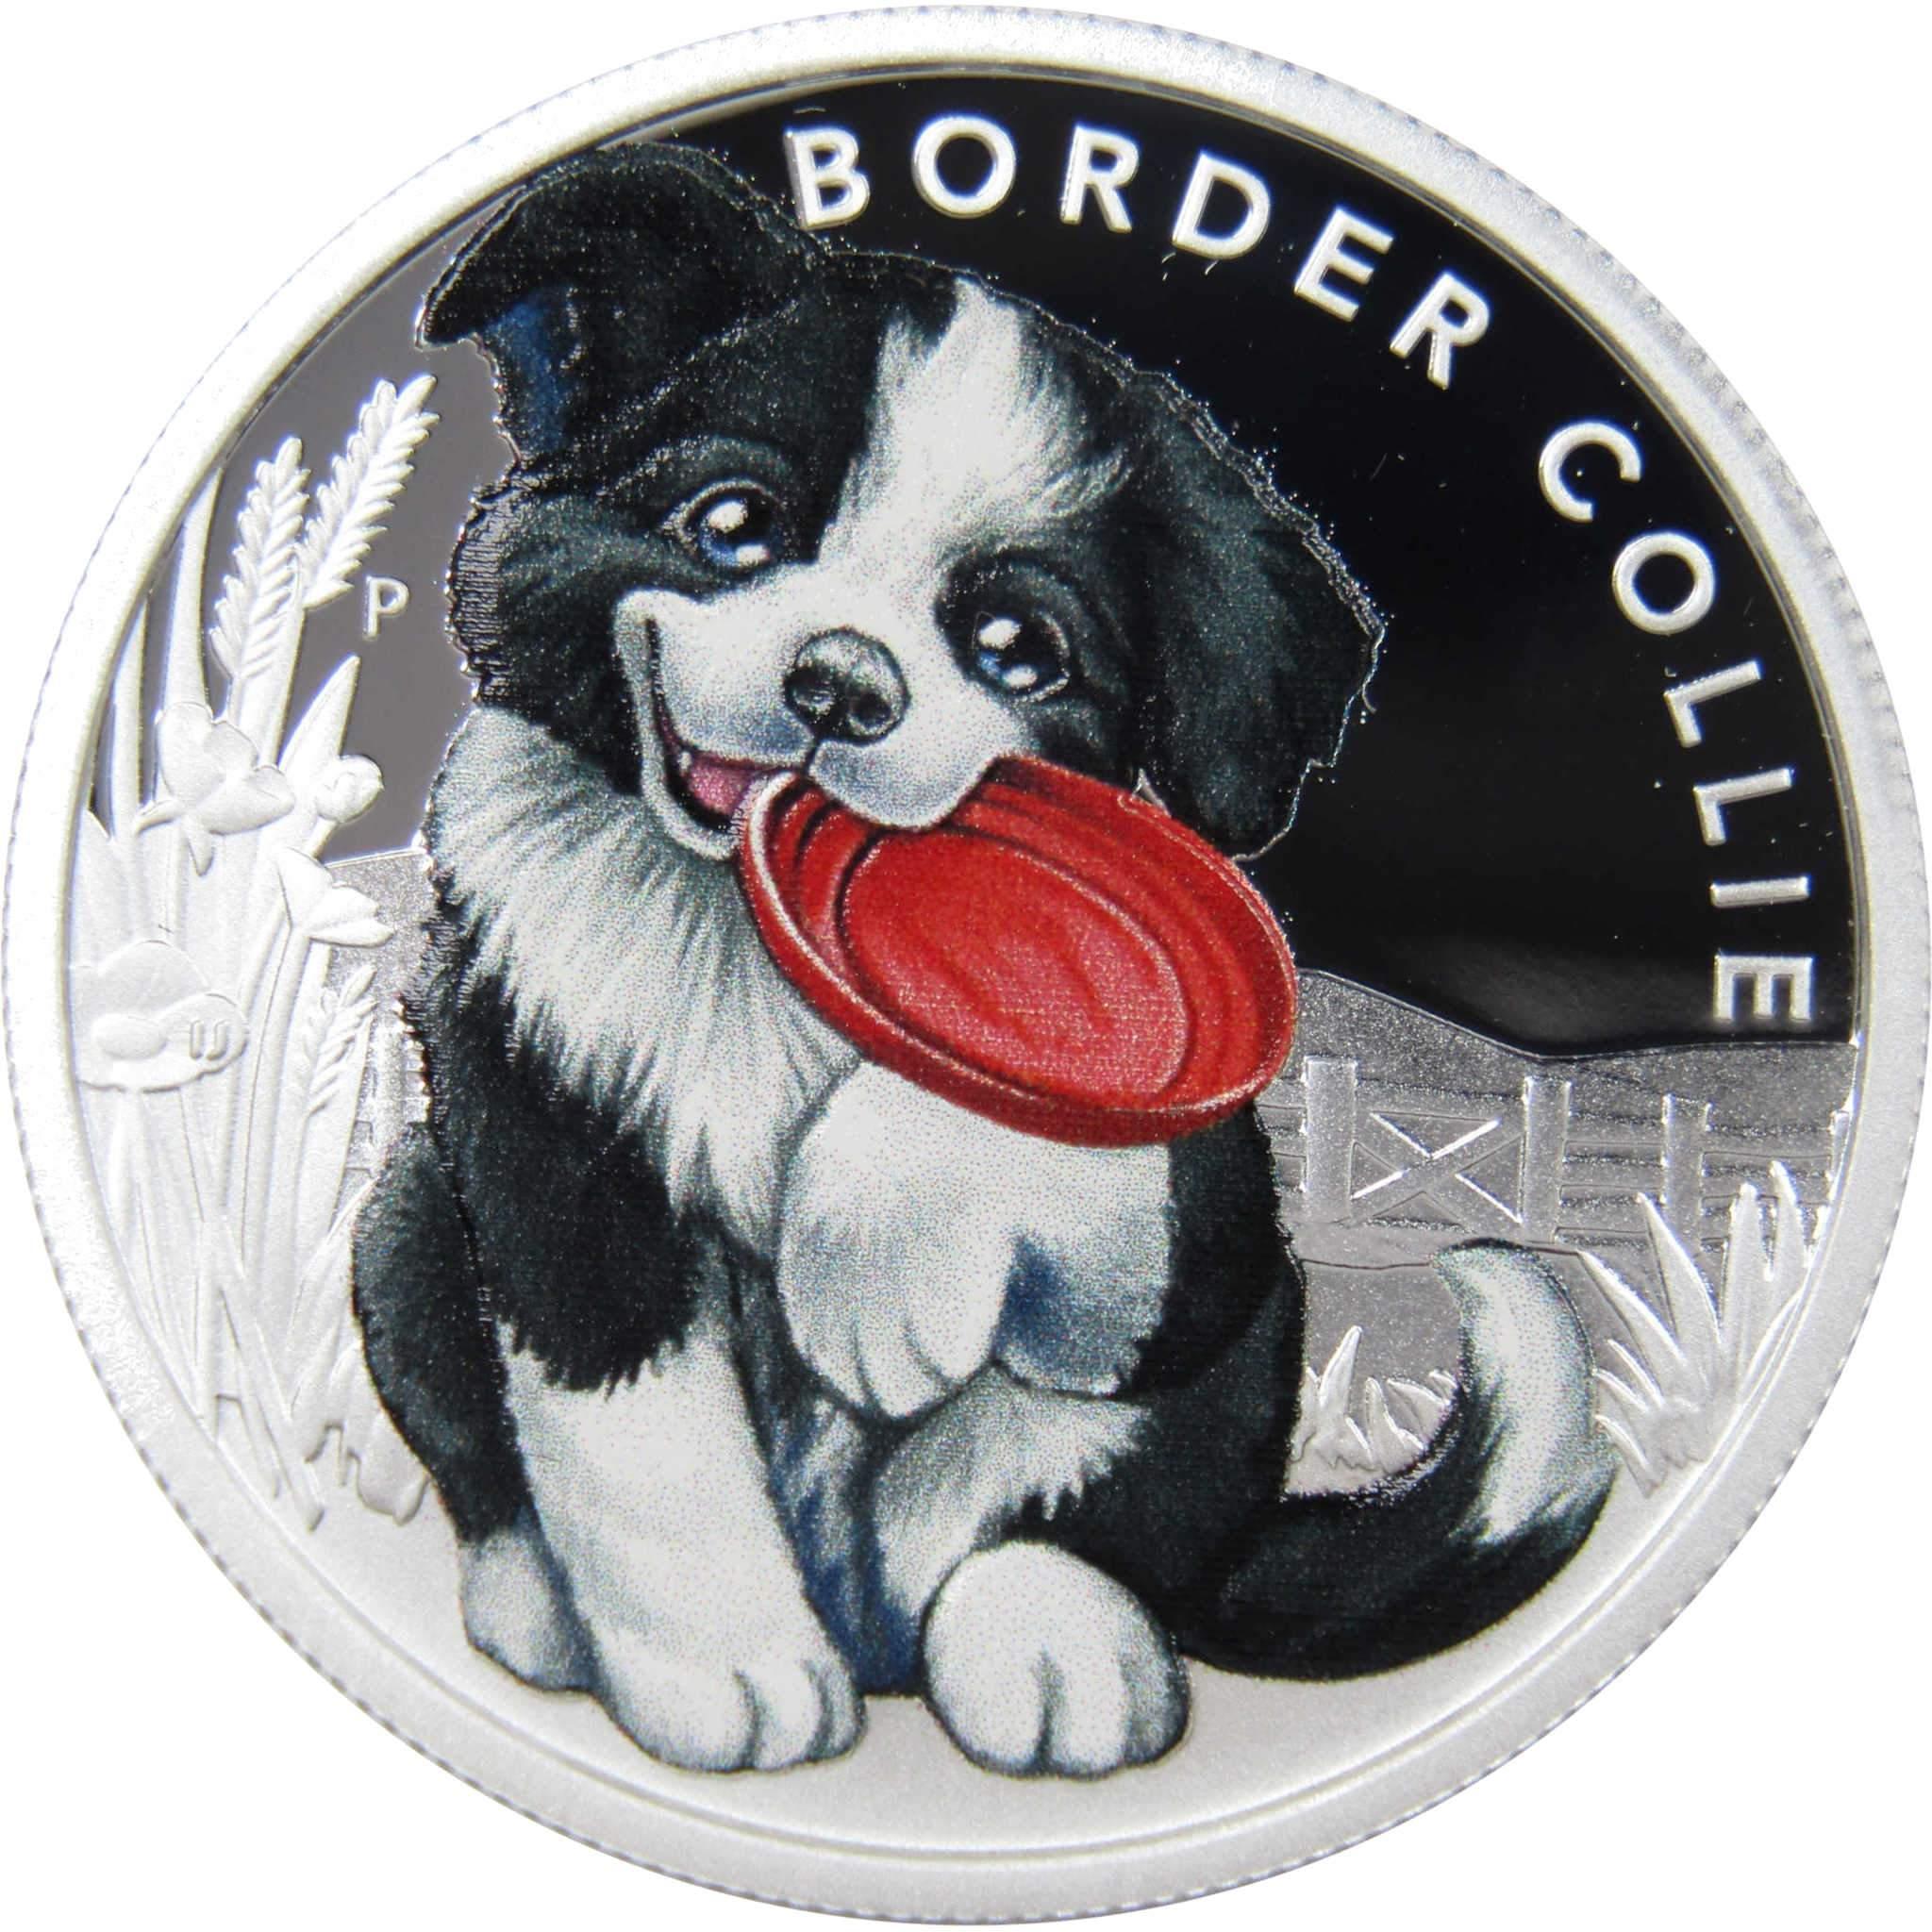 Puppies Border Collie 1/2 oz .9999 Silver Proof 50c Coin 2018 Tuvalu